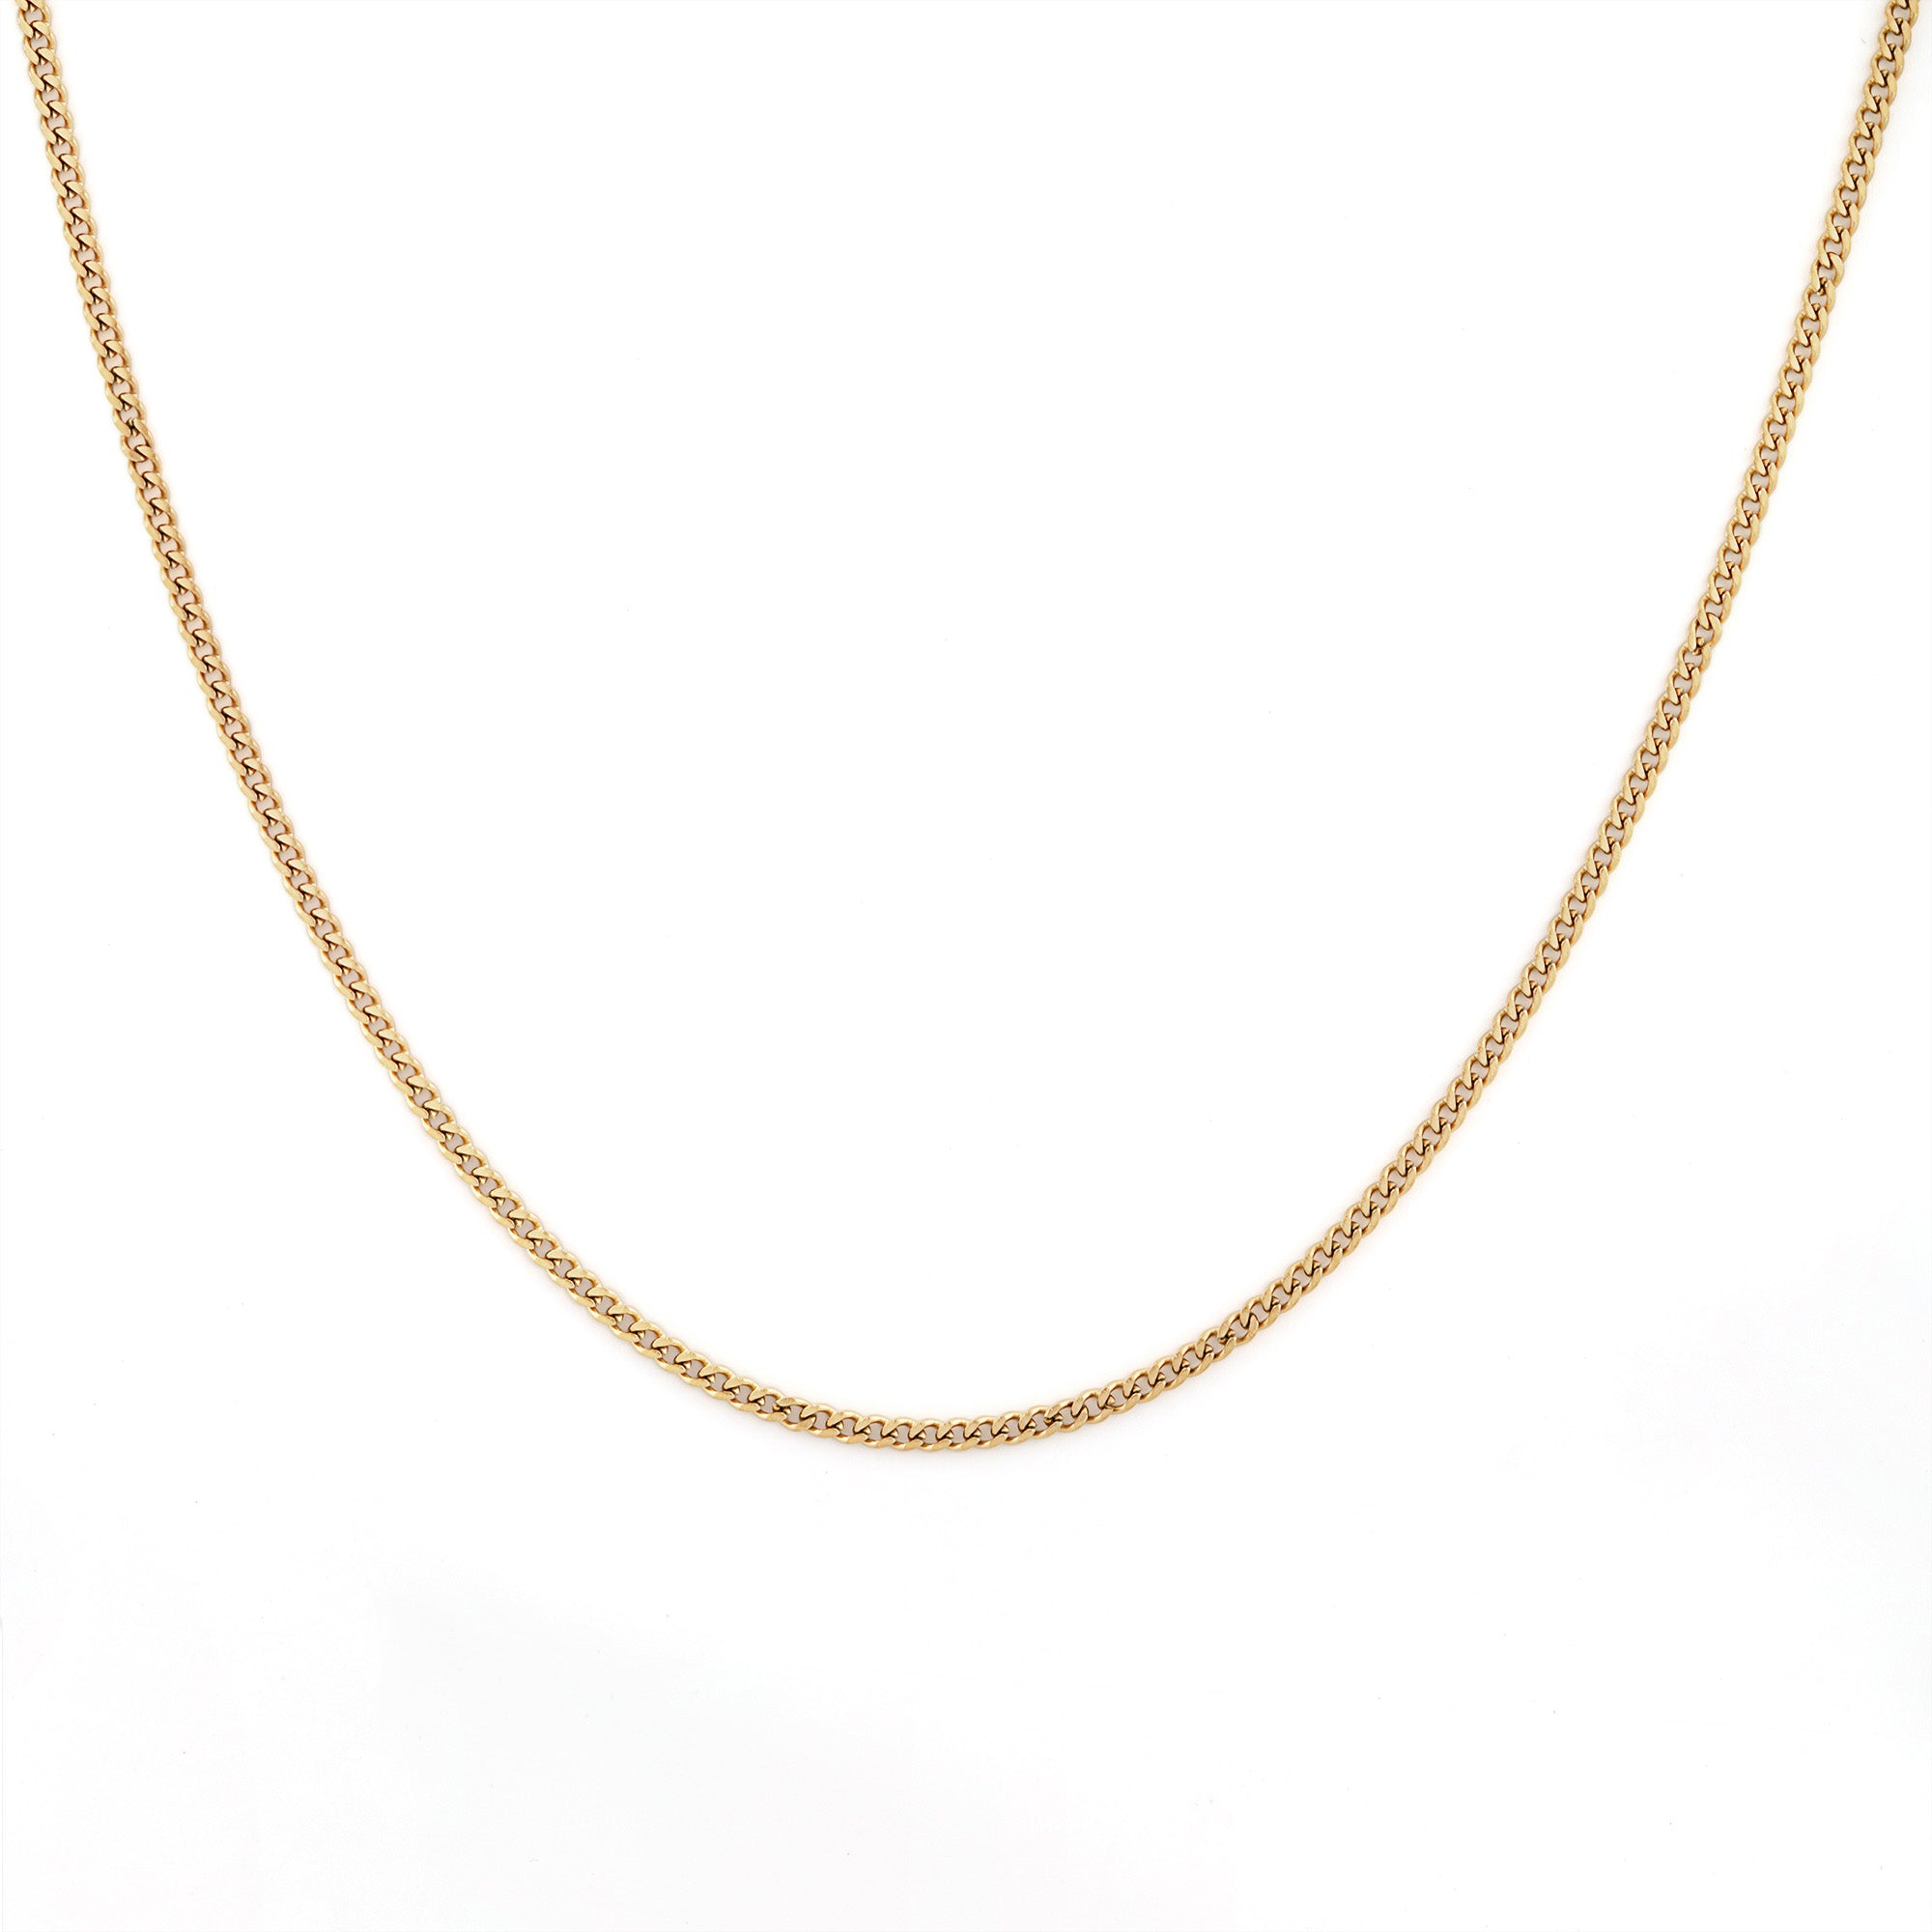 St-Laurent men's necklace by Five Jwlry, featuring a thin 3mm flat Cuban chain in 14k gold stainless steel. Hypoallergenic, waterproof, and backed by a 2-year warranty.